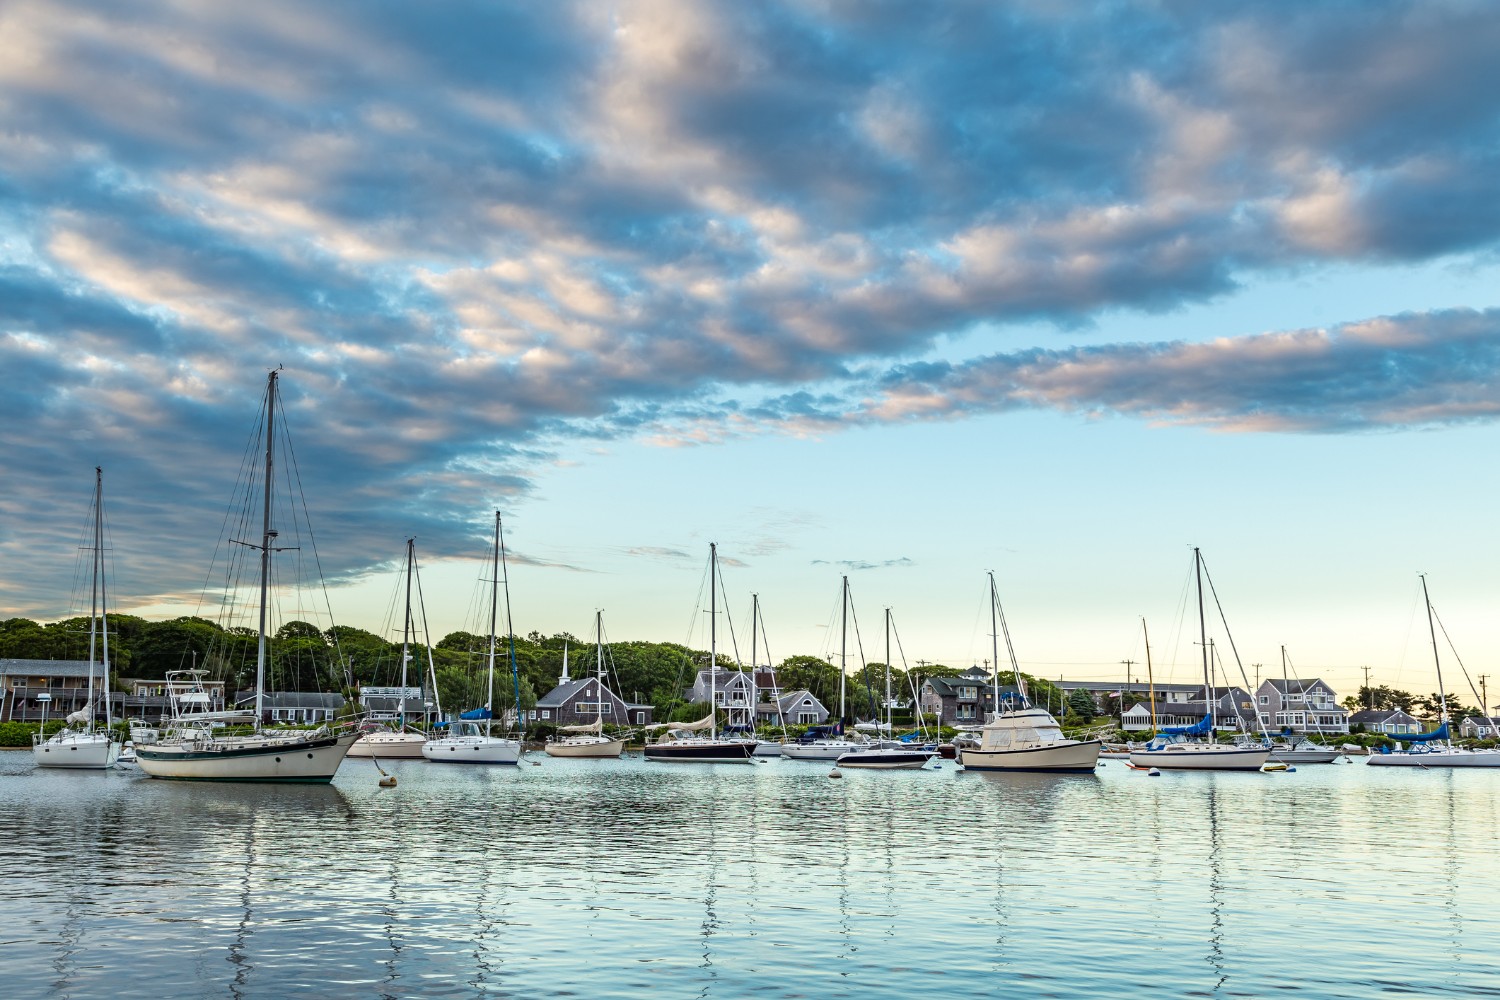 Falmouth Harbor is located on the south side of Cape Cod halfway between Newport, RI and Nantucket Island.